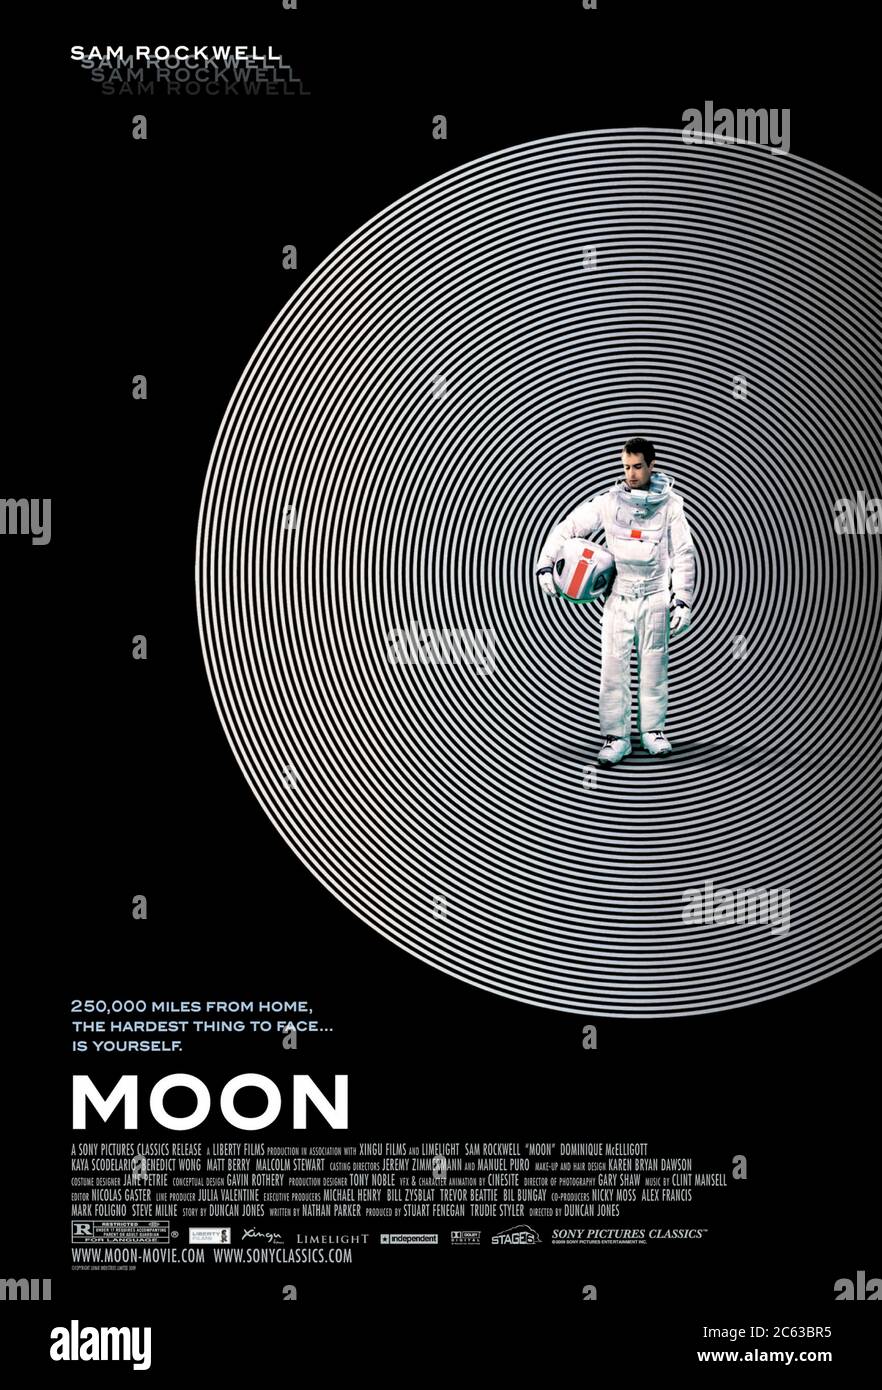 Moon (2009) directed by Duncan Jones and starring Sam Rockwell, Kevin Spacey and Dominique McElligott. An astronaut working on the moon discovers his retirement may come sooner then planned. US one sheet poster ***EDITORIAL USE ONLY***. Credit: BFA / Sony Pictures Classics Stock Photo